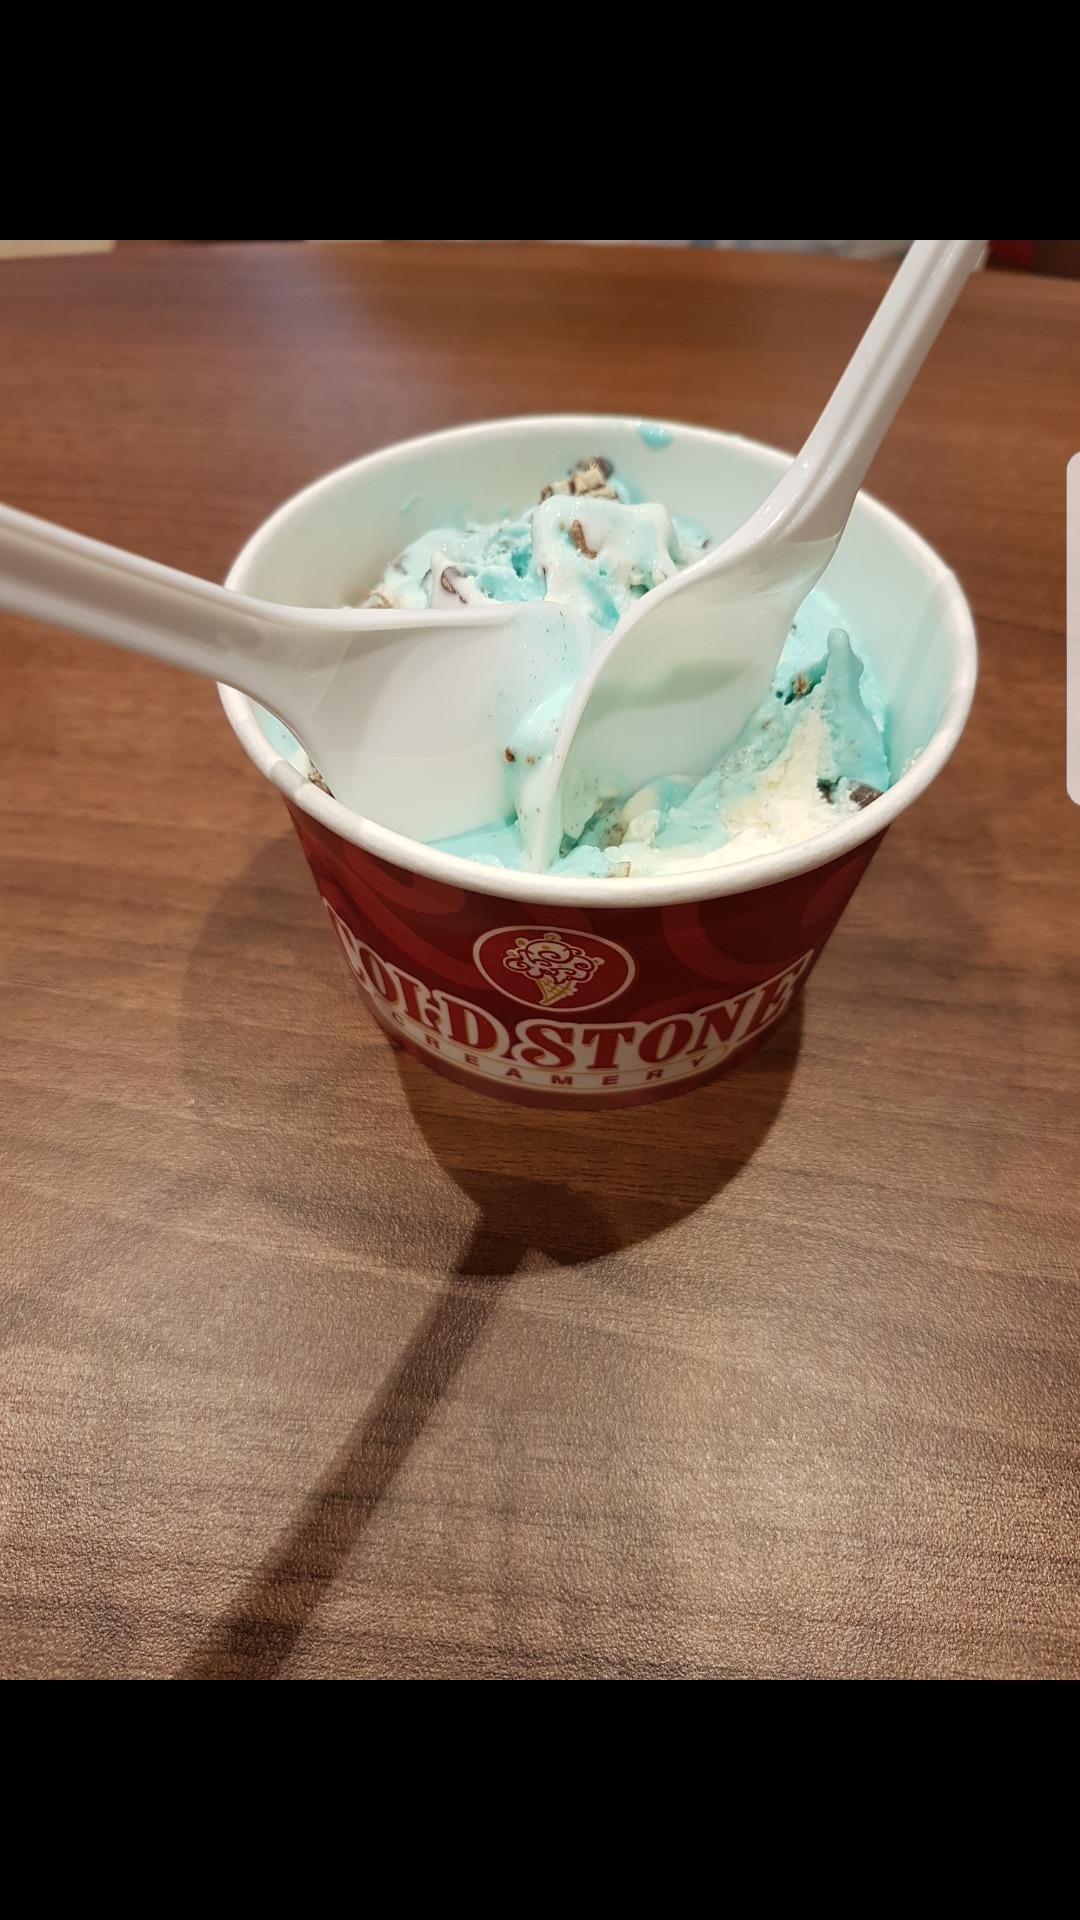 very nice but not really special @ Cold Stone Creamery - Bahrain